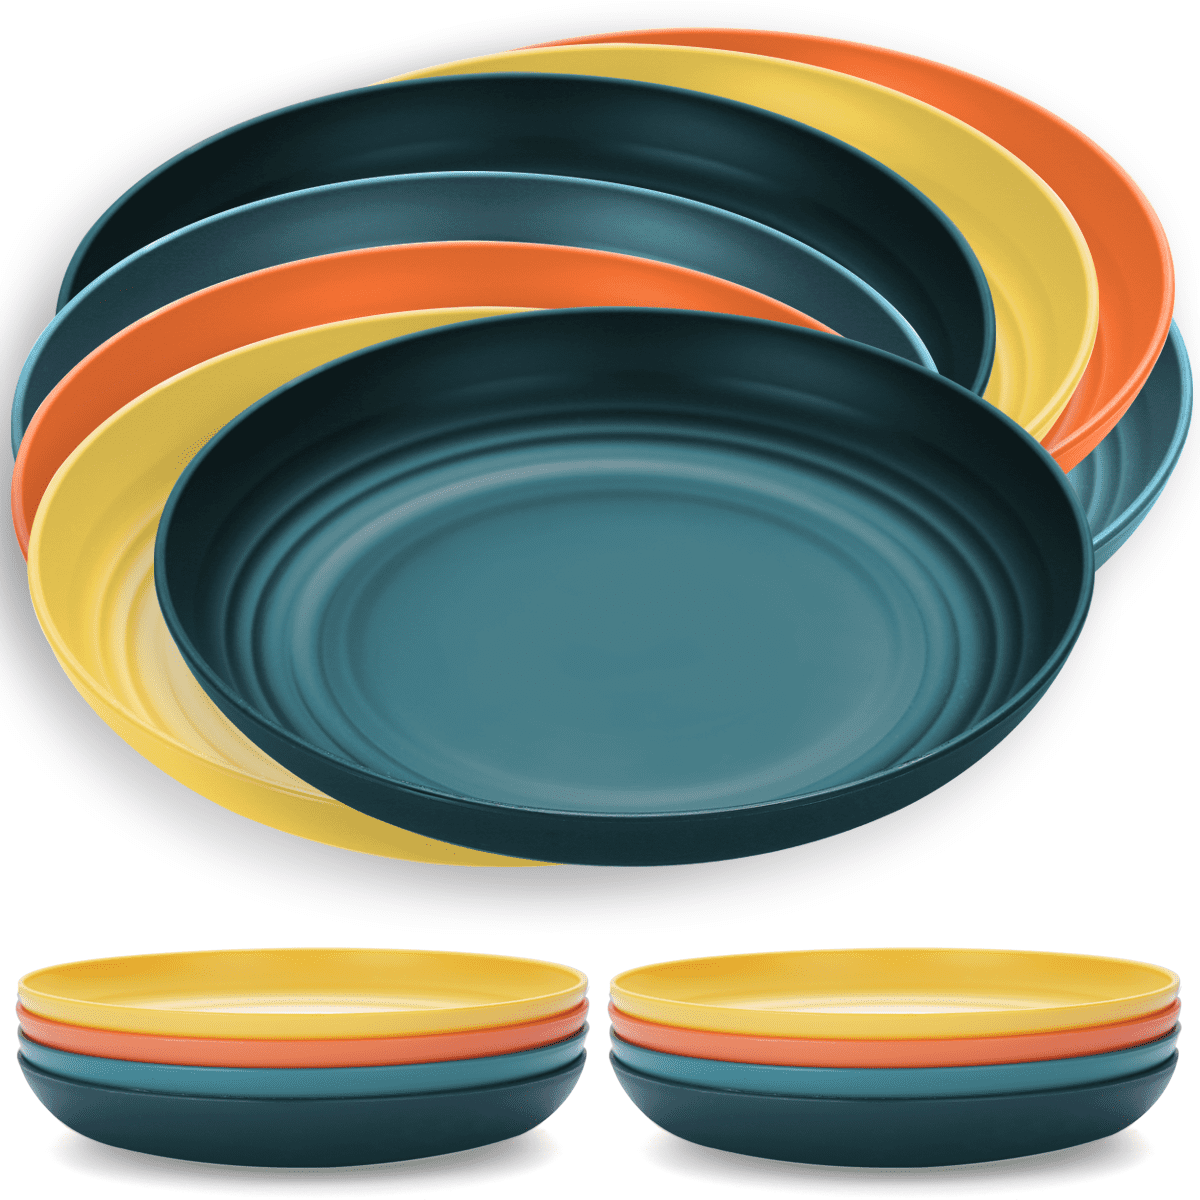 Details about   DINNERWARE SET 16-Piece Plates Bowls Mugs Dishes Stoneware Square Dinner Kitchen 